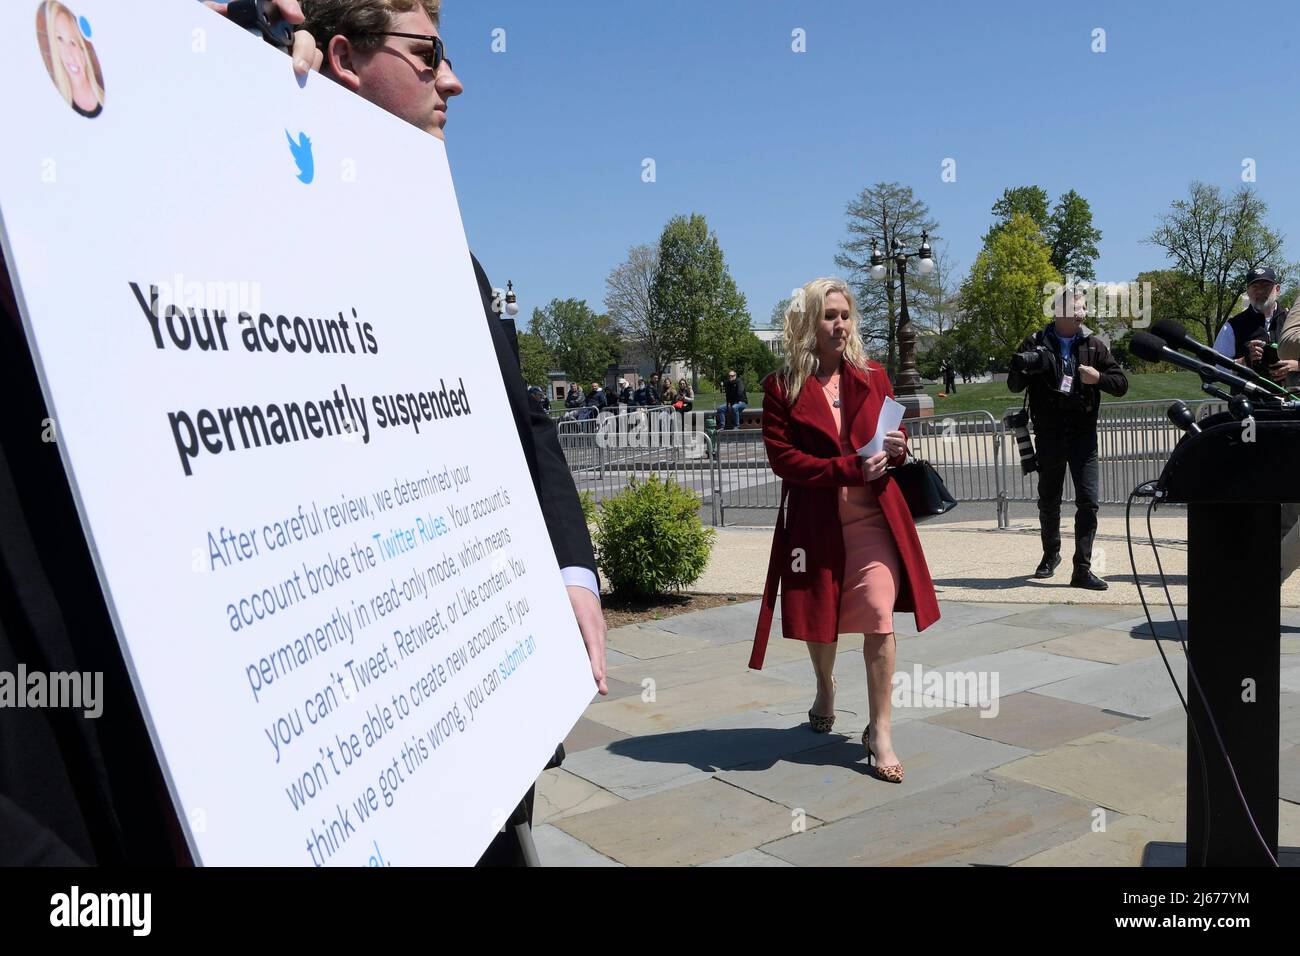 https://c8.alamy.com/comp/2J677YM/us-representative-marjorie-taylor-greener-ga-arrives-to-hold-a-press-conference-about-elon-musks-purchase-of-twitter-and-her-vision-of-free-speech-online-today-on-april-28-2022-at-house-trianglecapitol-hill-in-washington-dc-usa-photo-by-lenin-nollysipa-usa-2J677YM.jpg